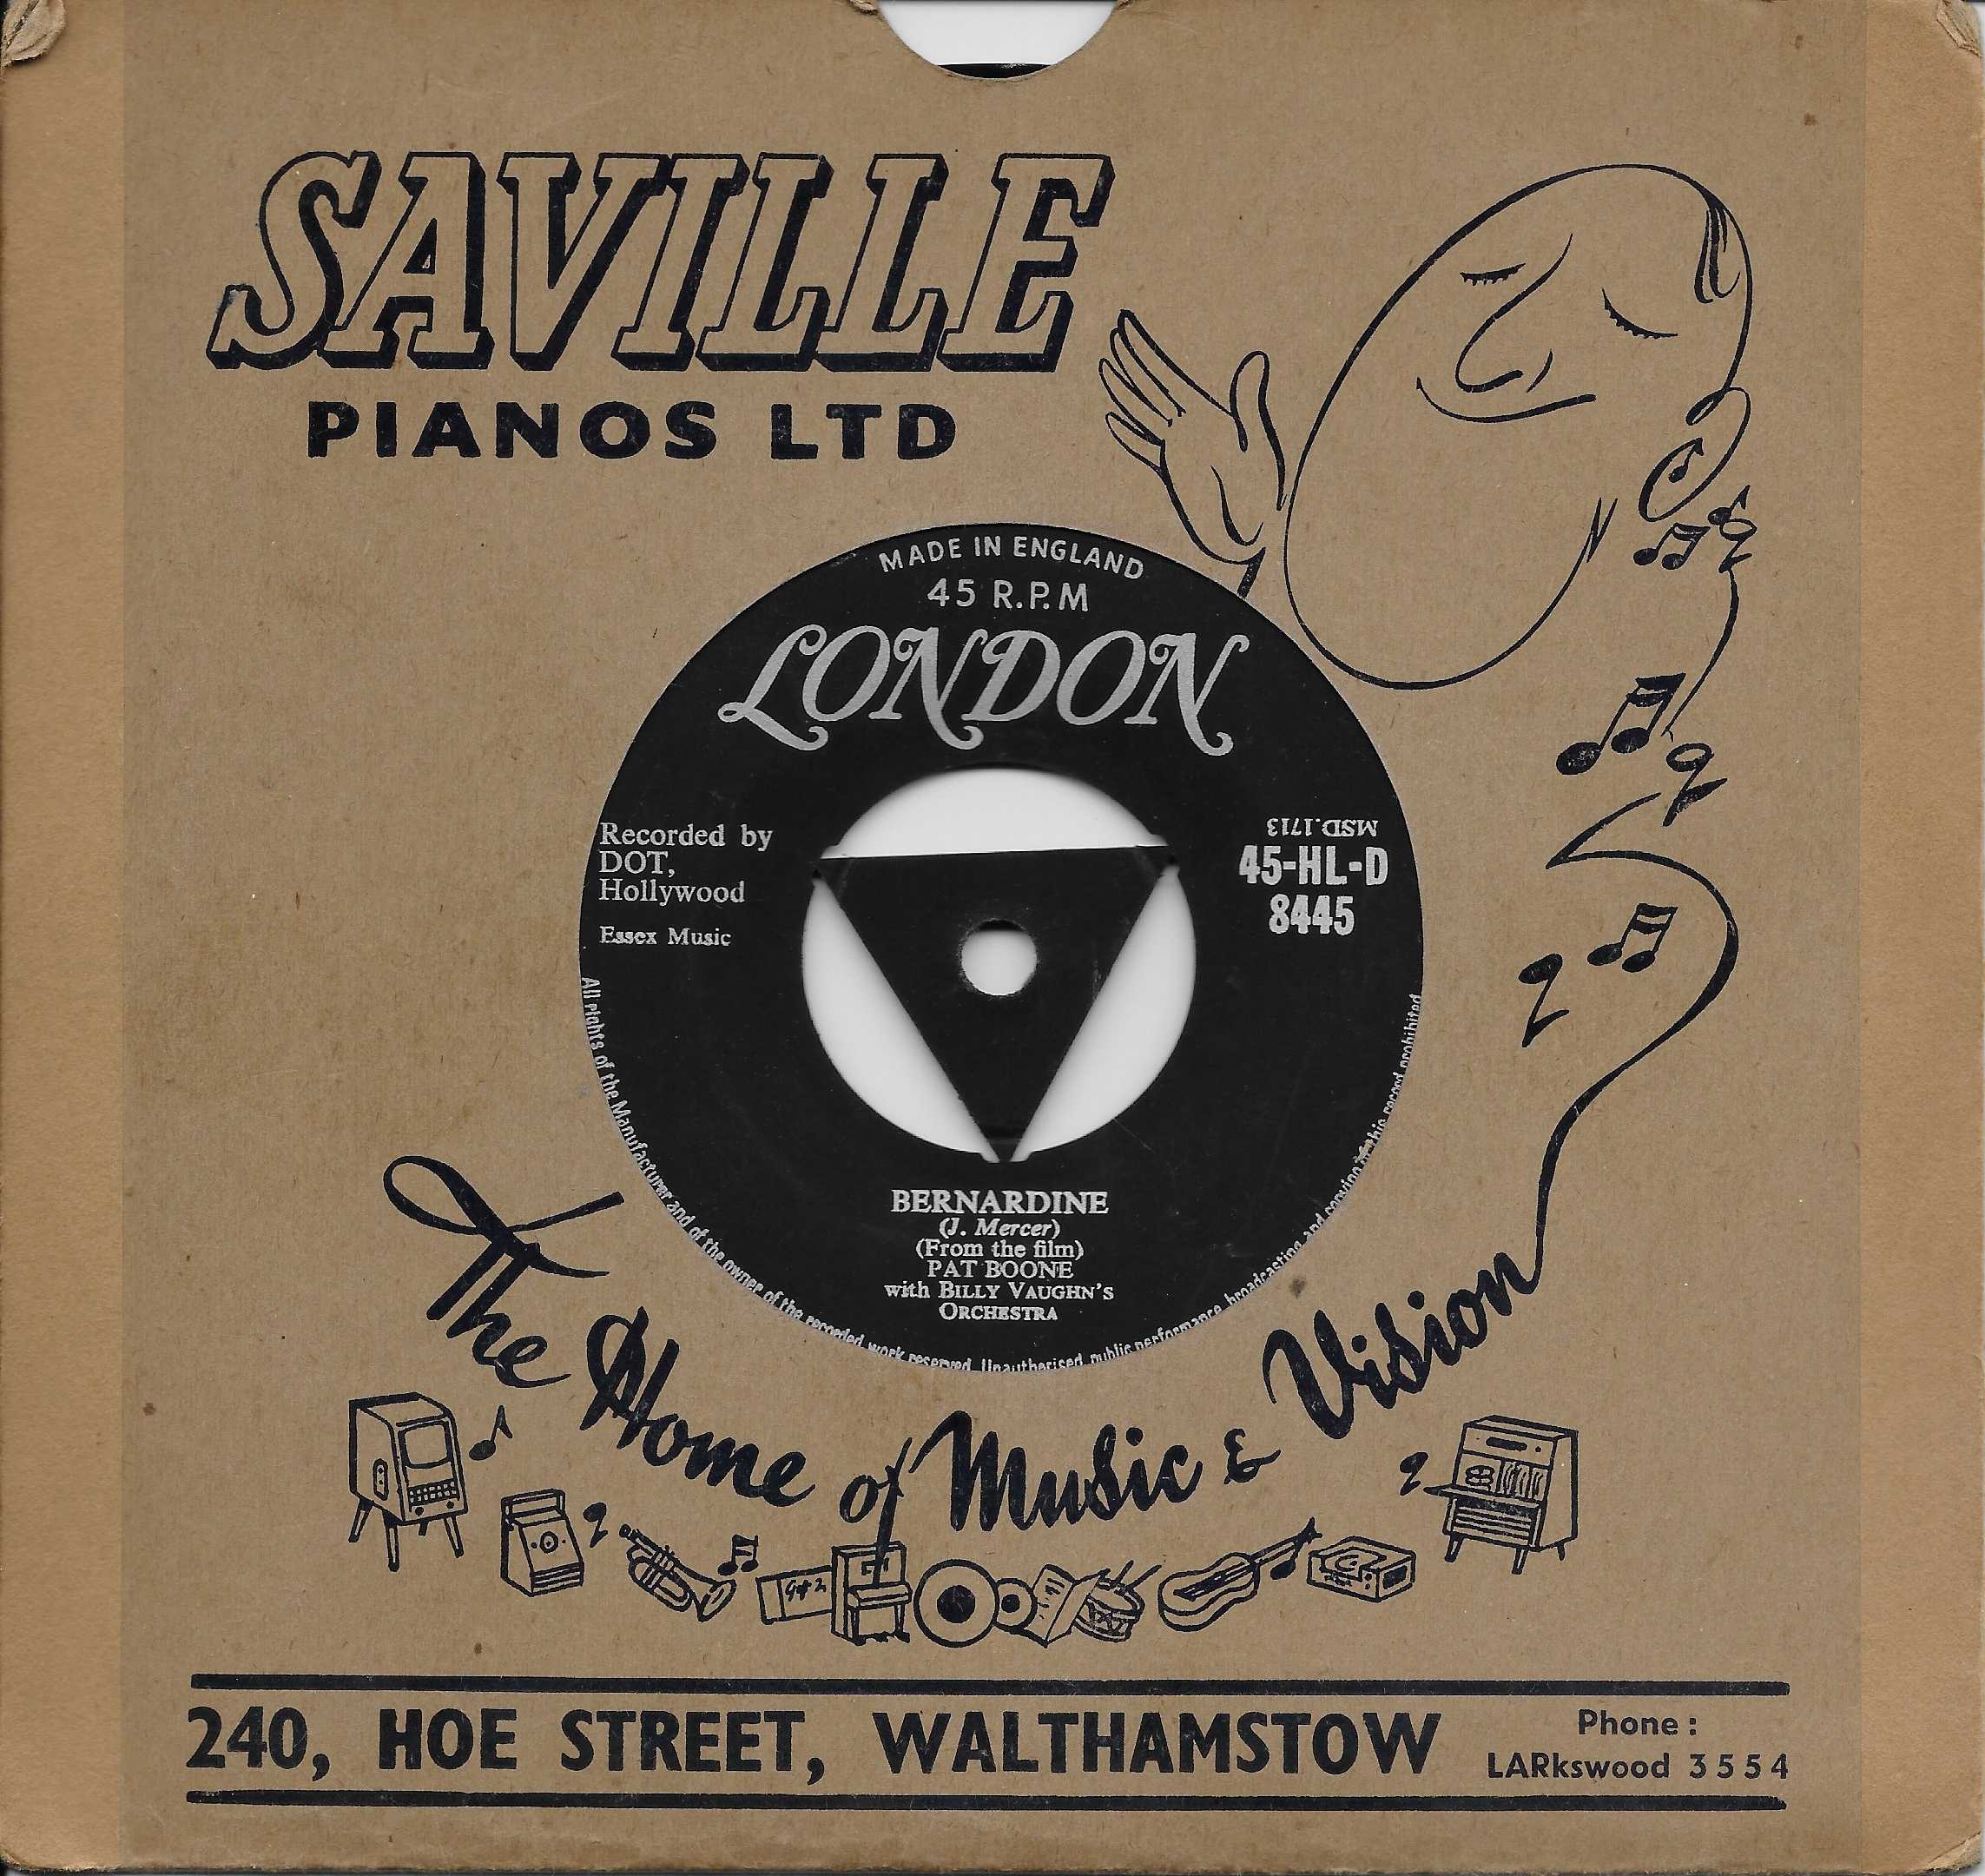 Picture of 45-HL-D 8445 Bernadine by artist J. Mercer / Coots / Kenny / Kenny / Pat Boone with Billy Vaughn's orchestra from ITV, Channel 4 and Channel 5 singles library